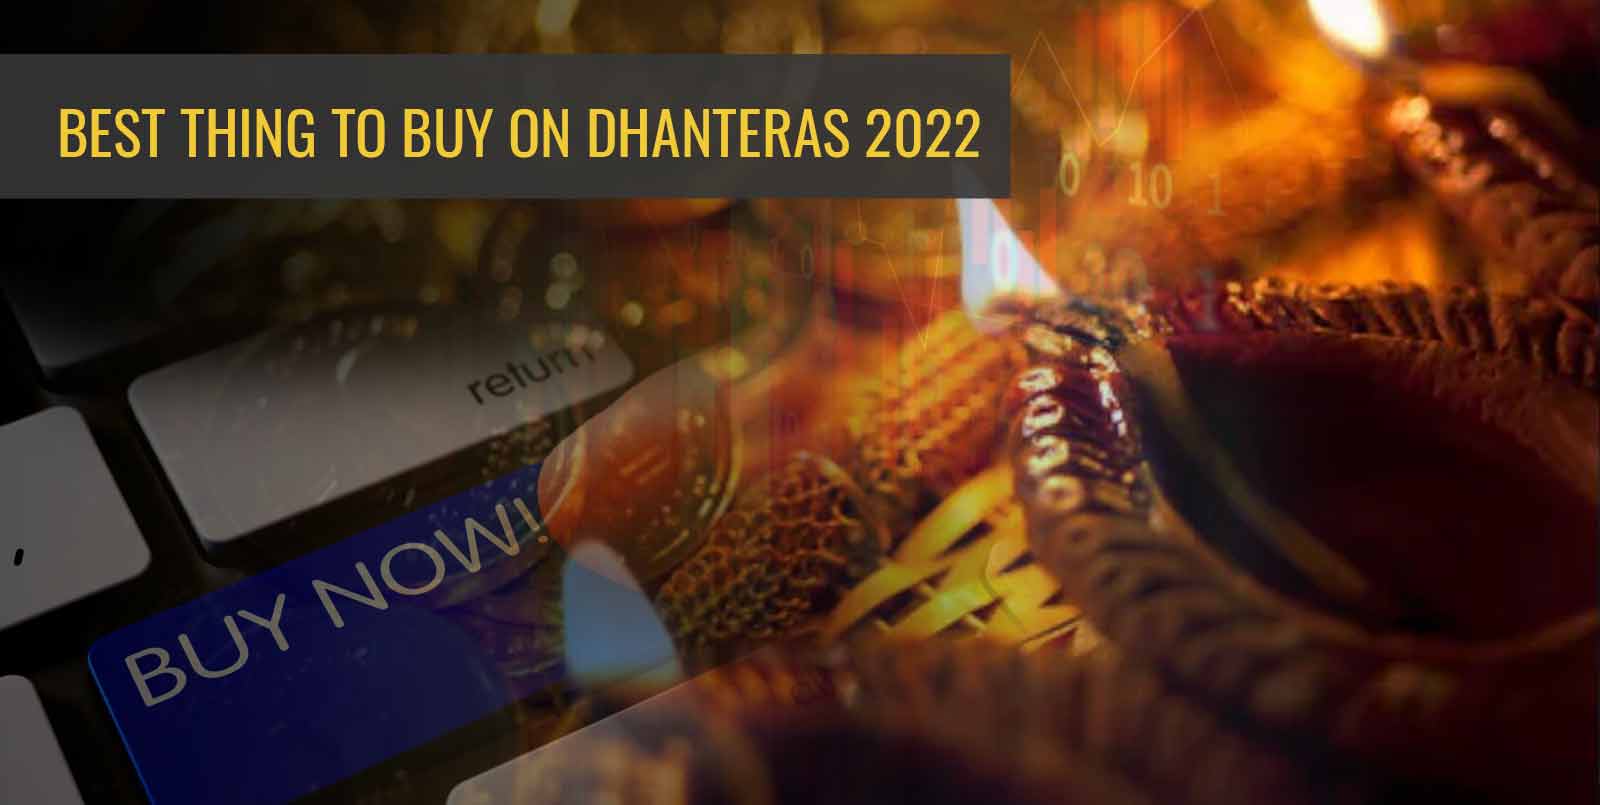  Best Thing to Buy on Dhanteras 2022 